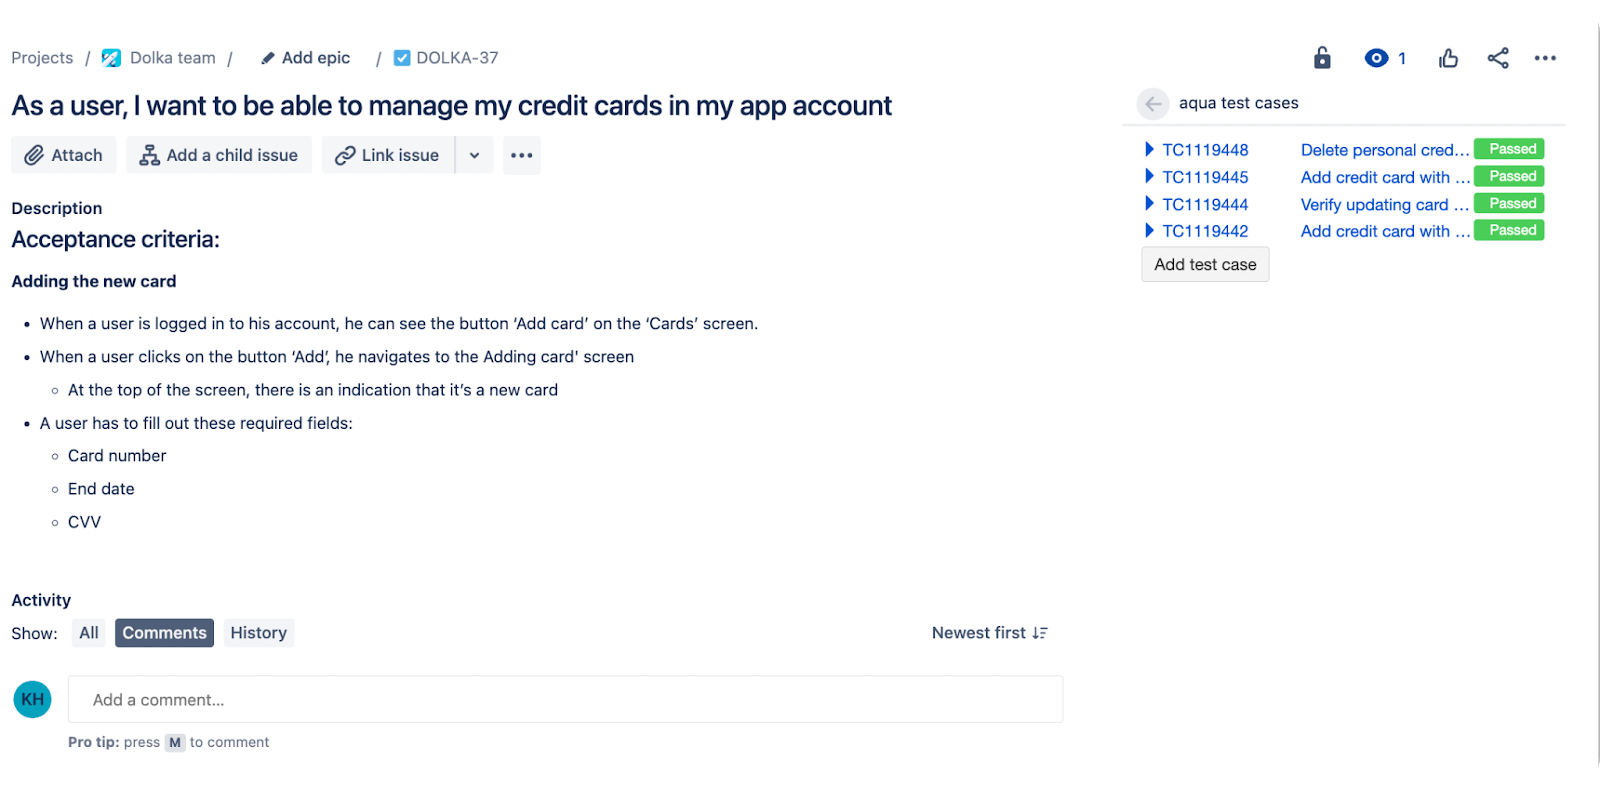 Jira can’t organise user stories that were repurposed as “test cases”